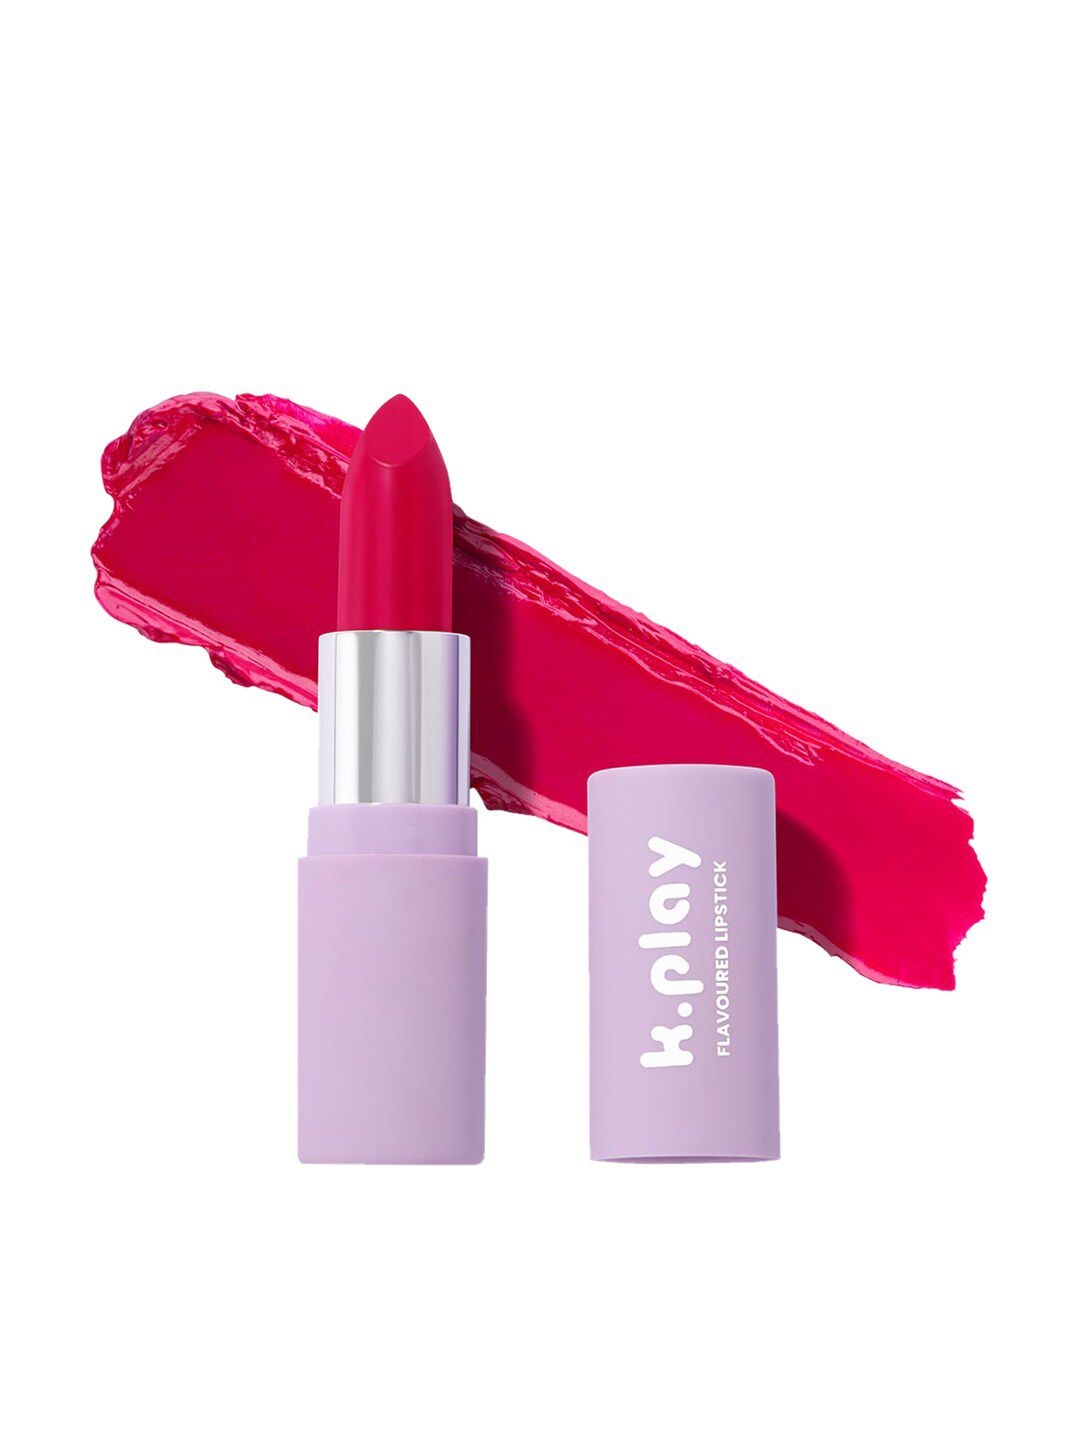 MyGlamm K.Play Flavoured Lipstick-Melon Squeeze-4.2g Price in India